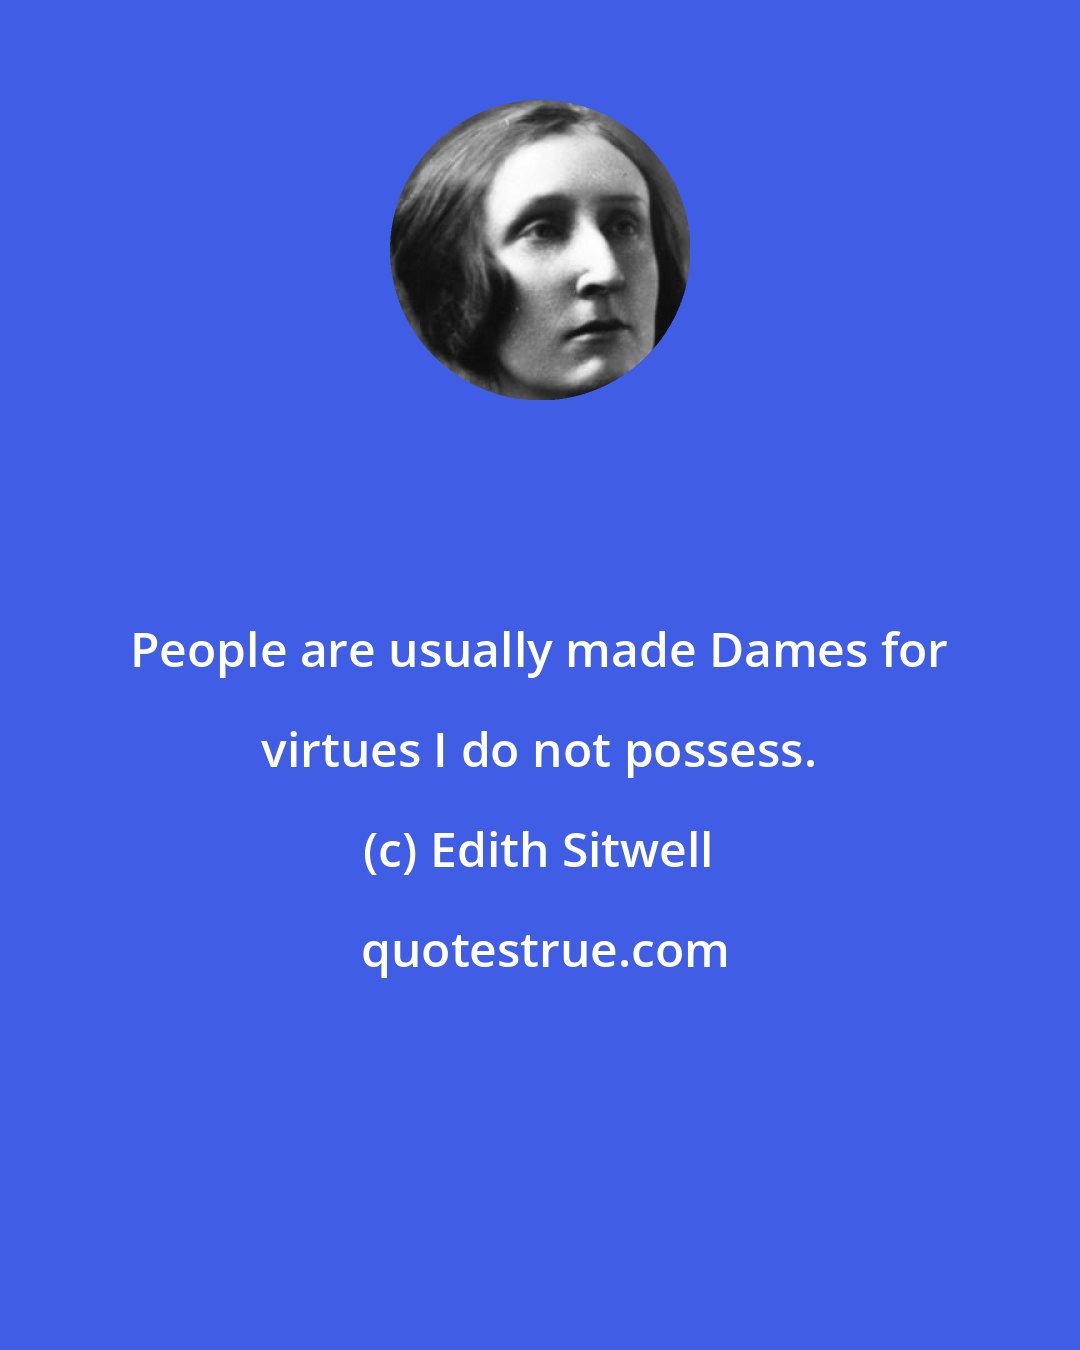 Edith Sitwell: People are usually made Dames for virtues I do not possess.